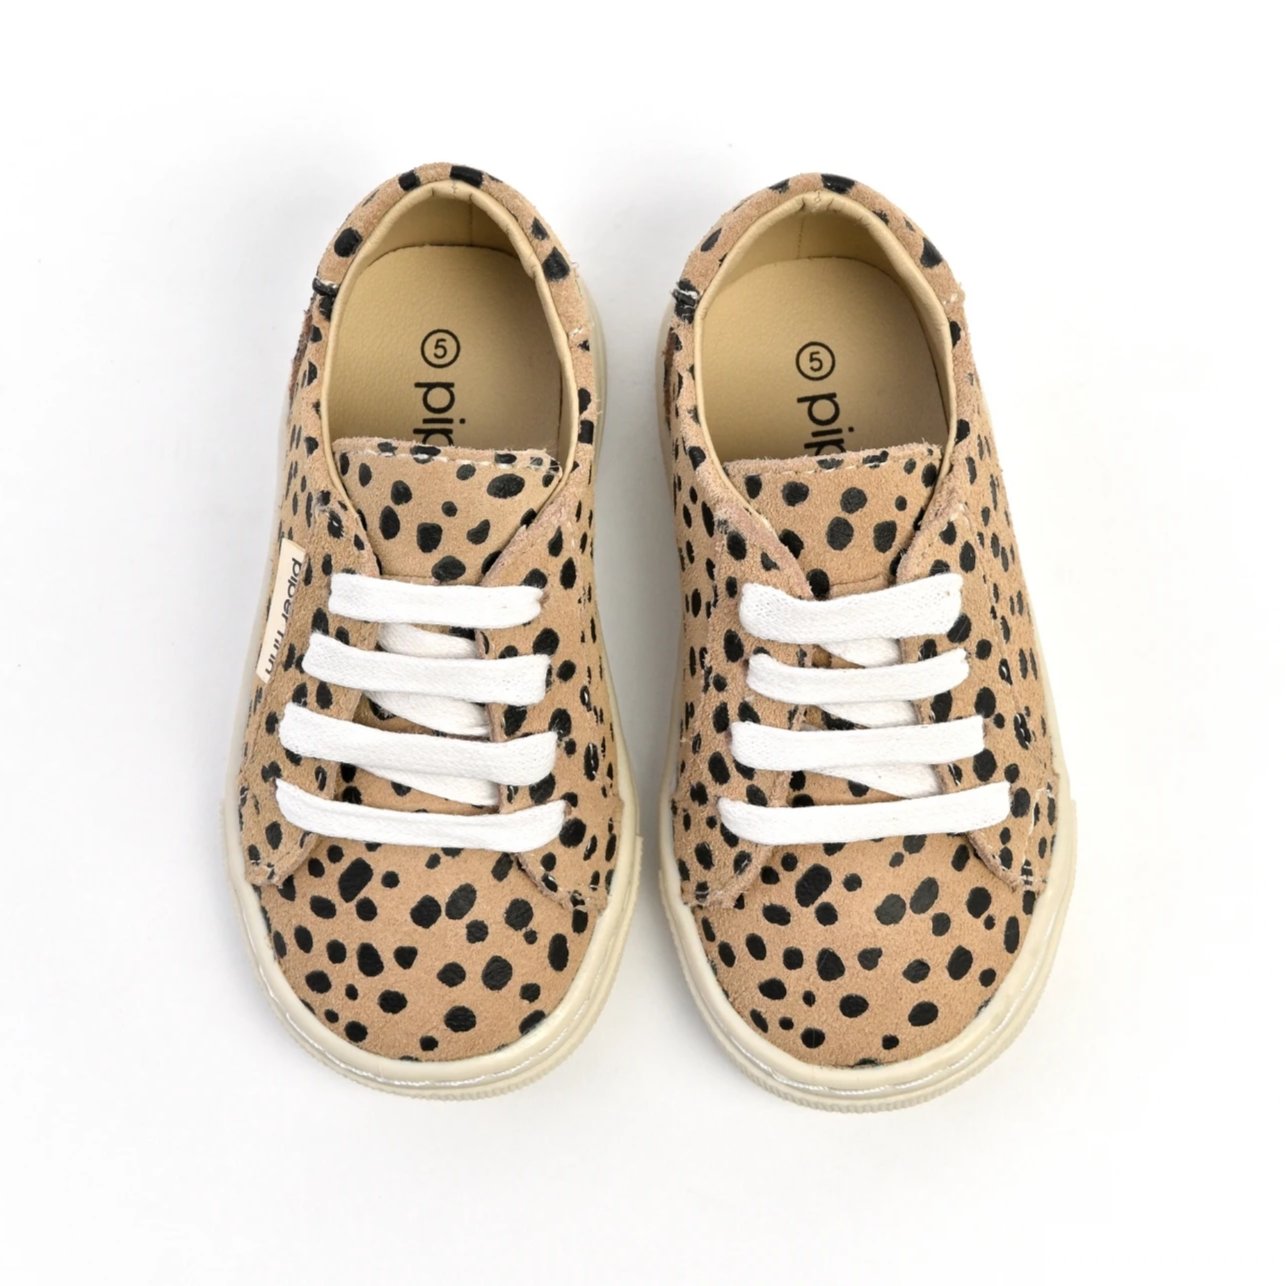 Piper Finn - Baby & Toddler Shoes - Leather Low Top Sneakers - Cheetah ...